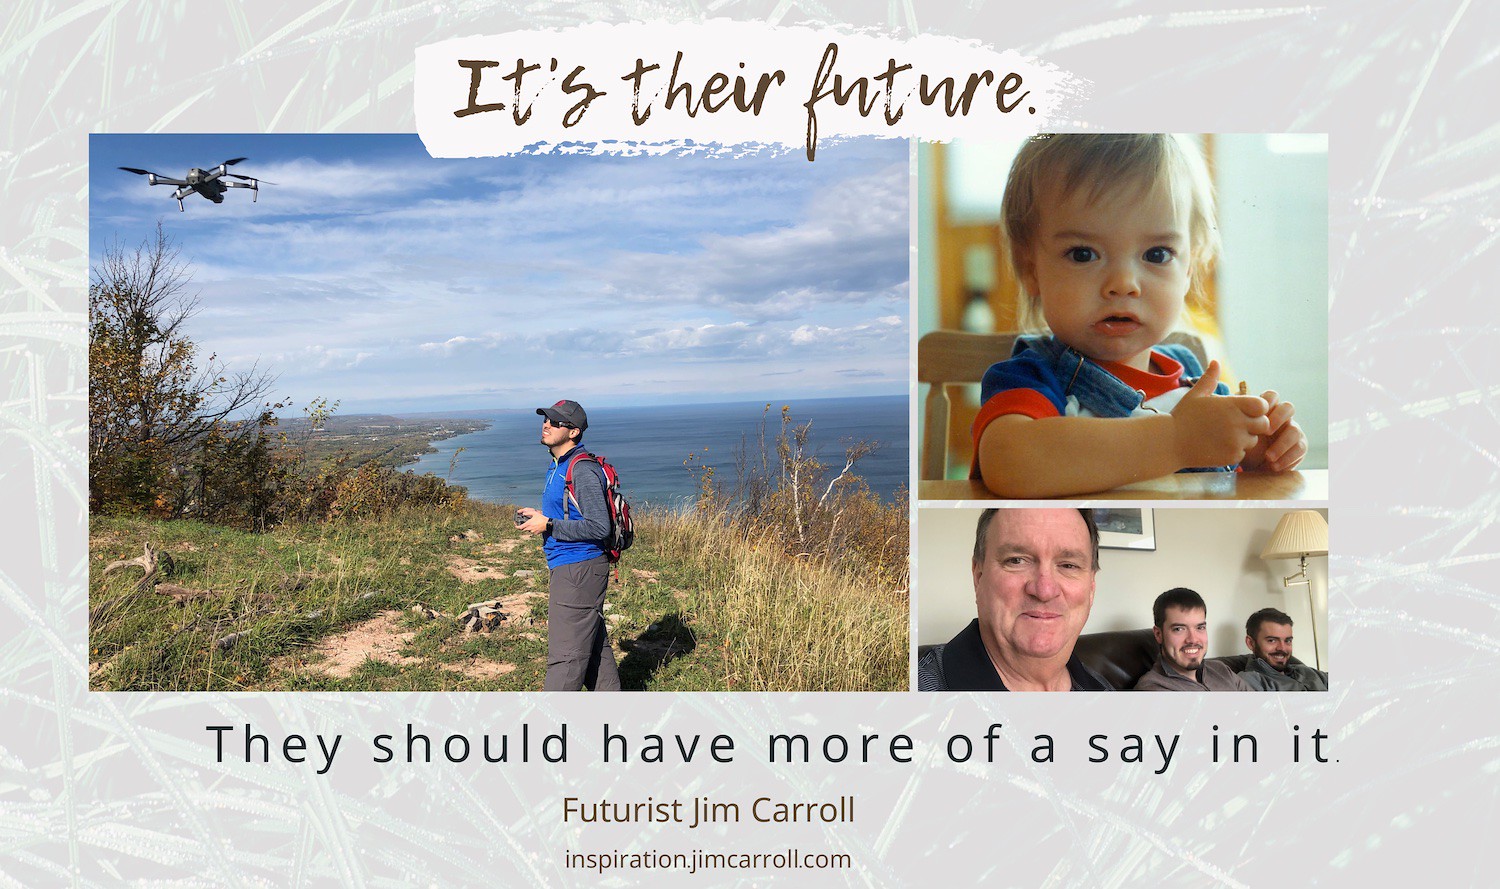 "It's their future. We should let them have more of a say in it." - Futurist Jim Carroll